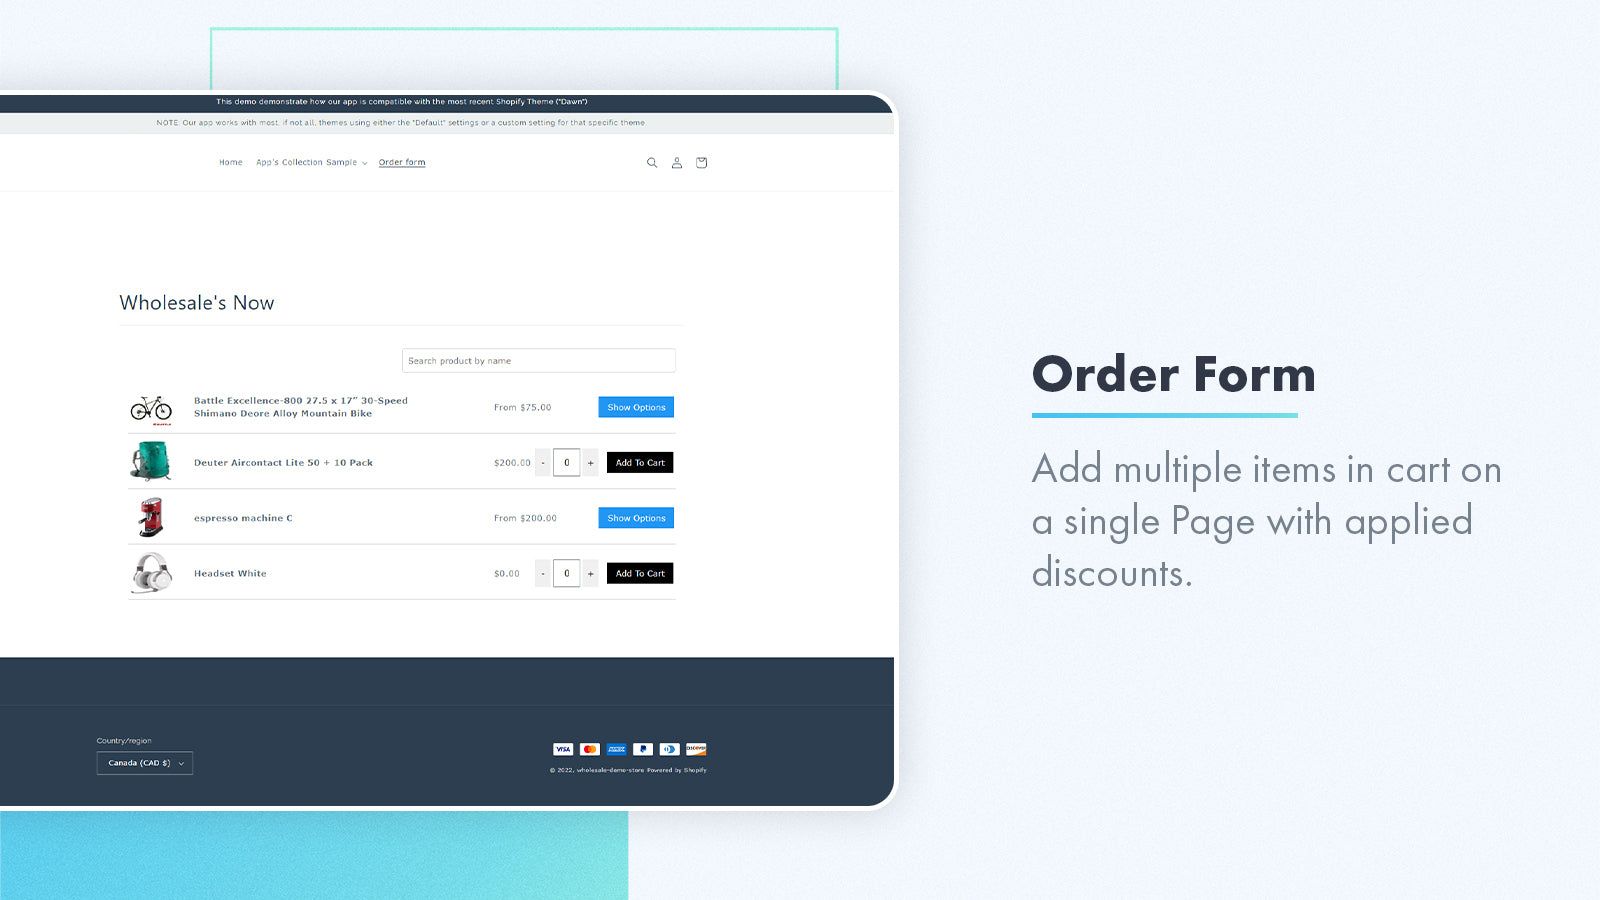 Embedded discount tables on product page for VIP & custom price